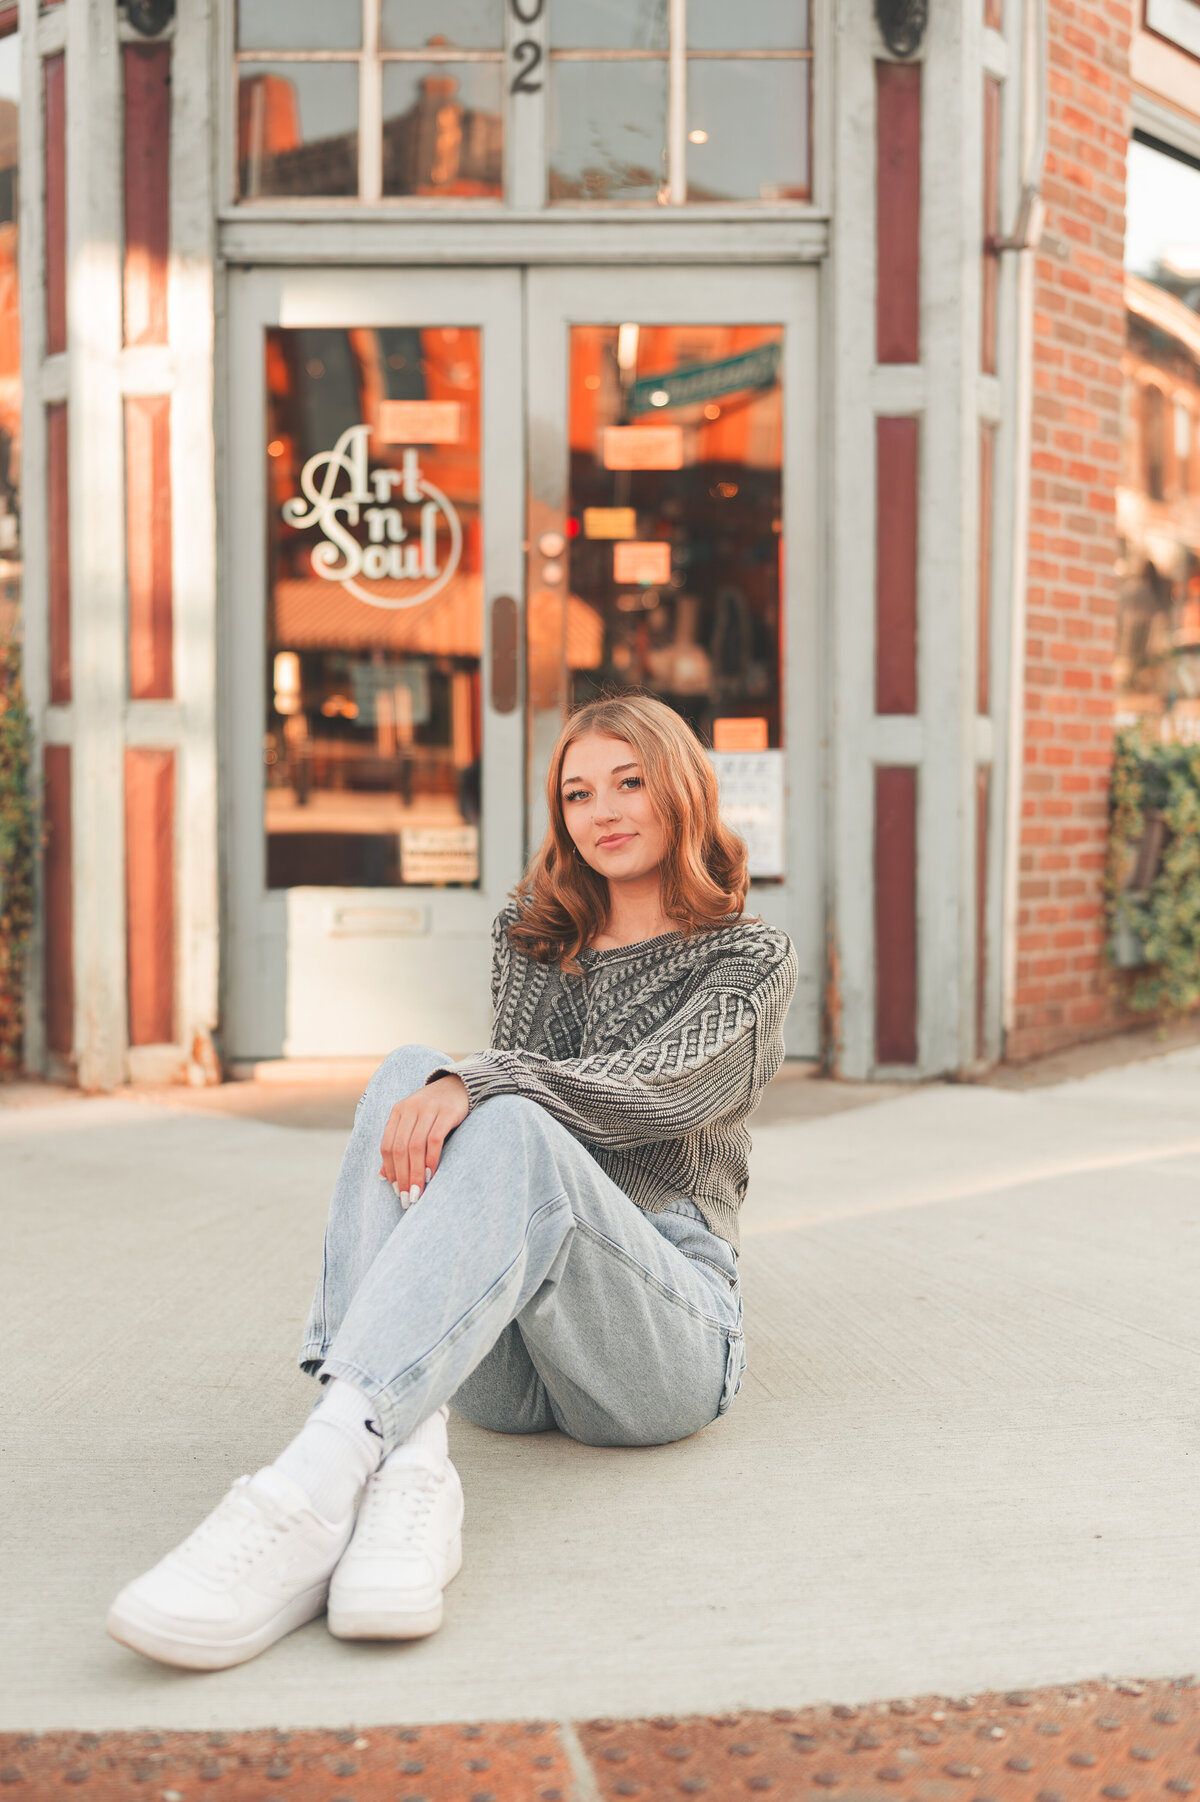 Discover cityscape charm with Shannon Kathleen Photography's St. Paul senior portraits. Elevate your legacy with modern flair. Book your session now